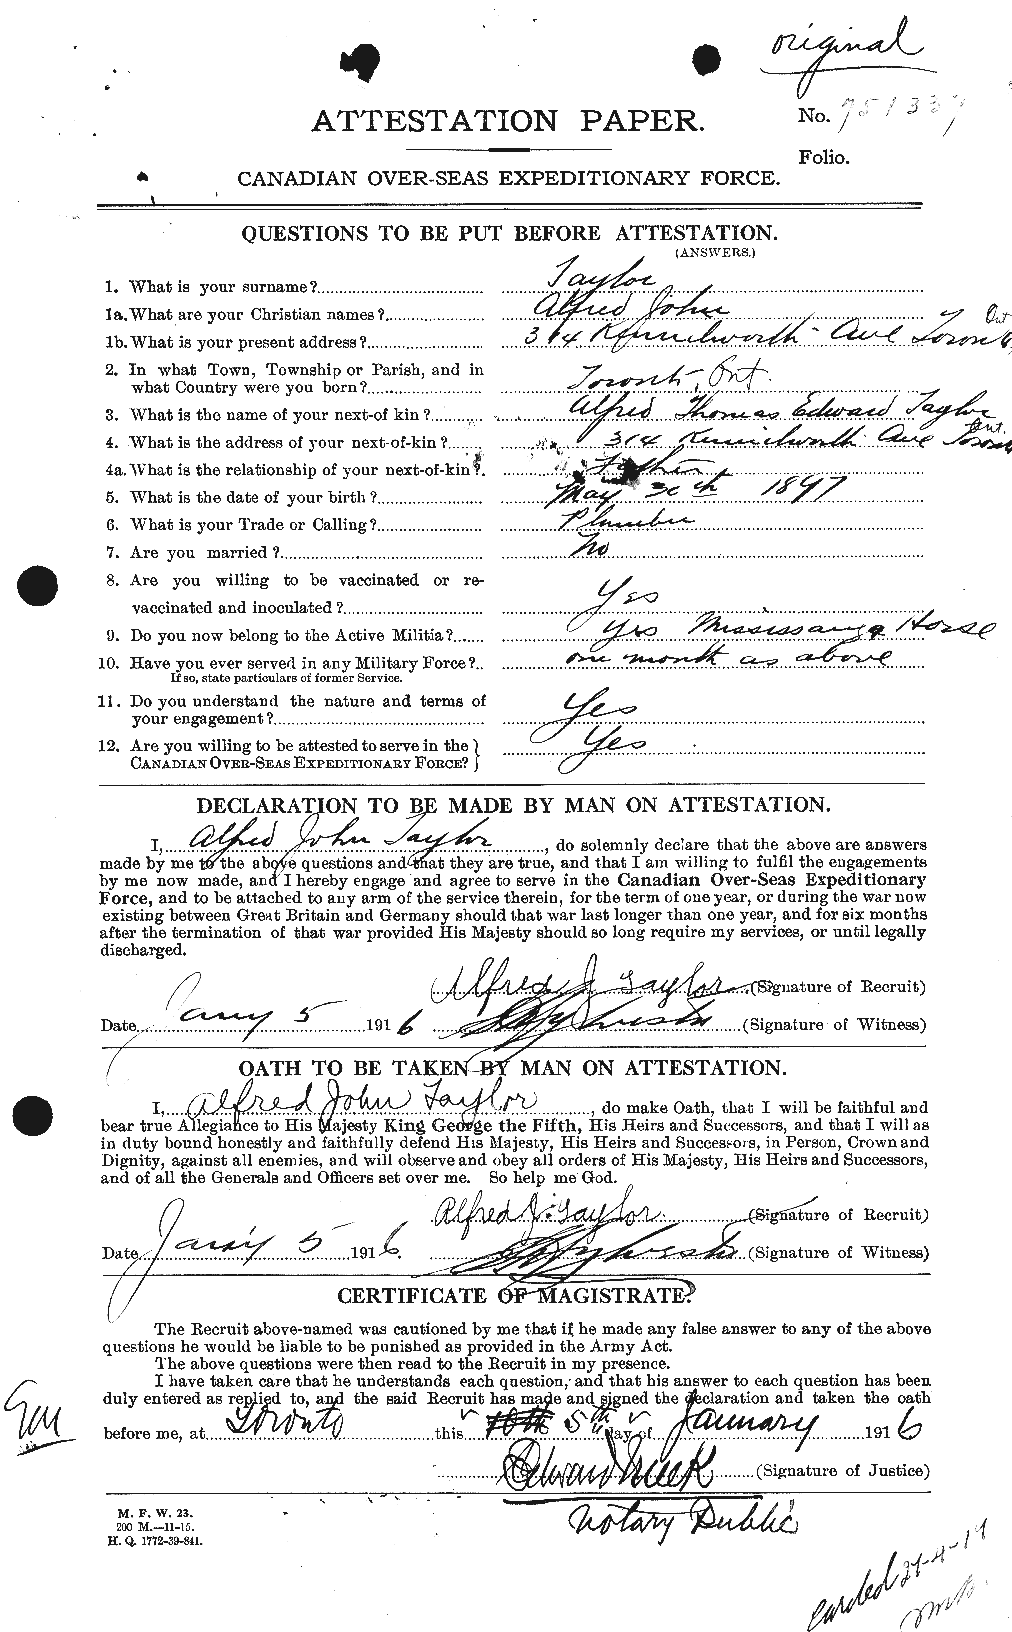 Personnel Records of the First World War - CEF 626188a